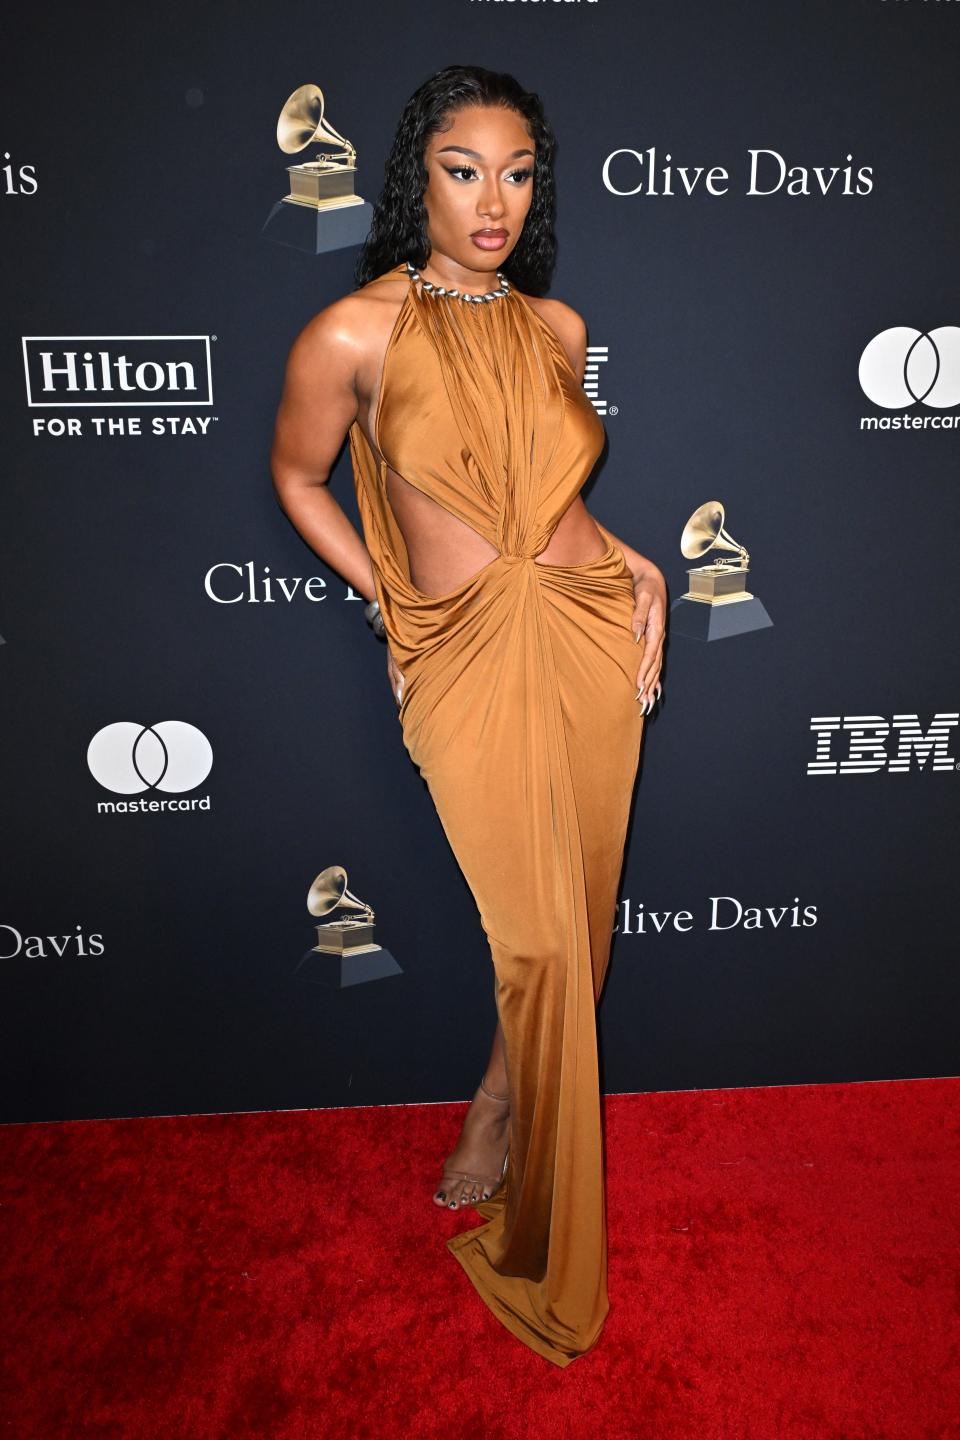 Megan Thee Stallion arrives for the Recording Academy and Clive Davis' Salute To Industry Icons pre-Grammy gala. Her recent diss track "Hiss" hit No. 1 on the Billboard Hot 100.